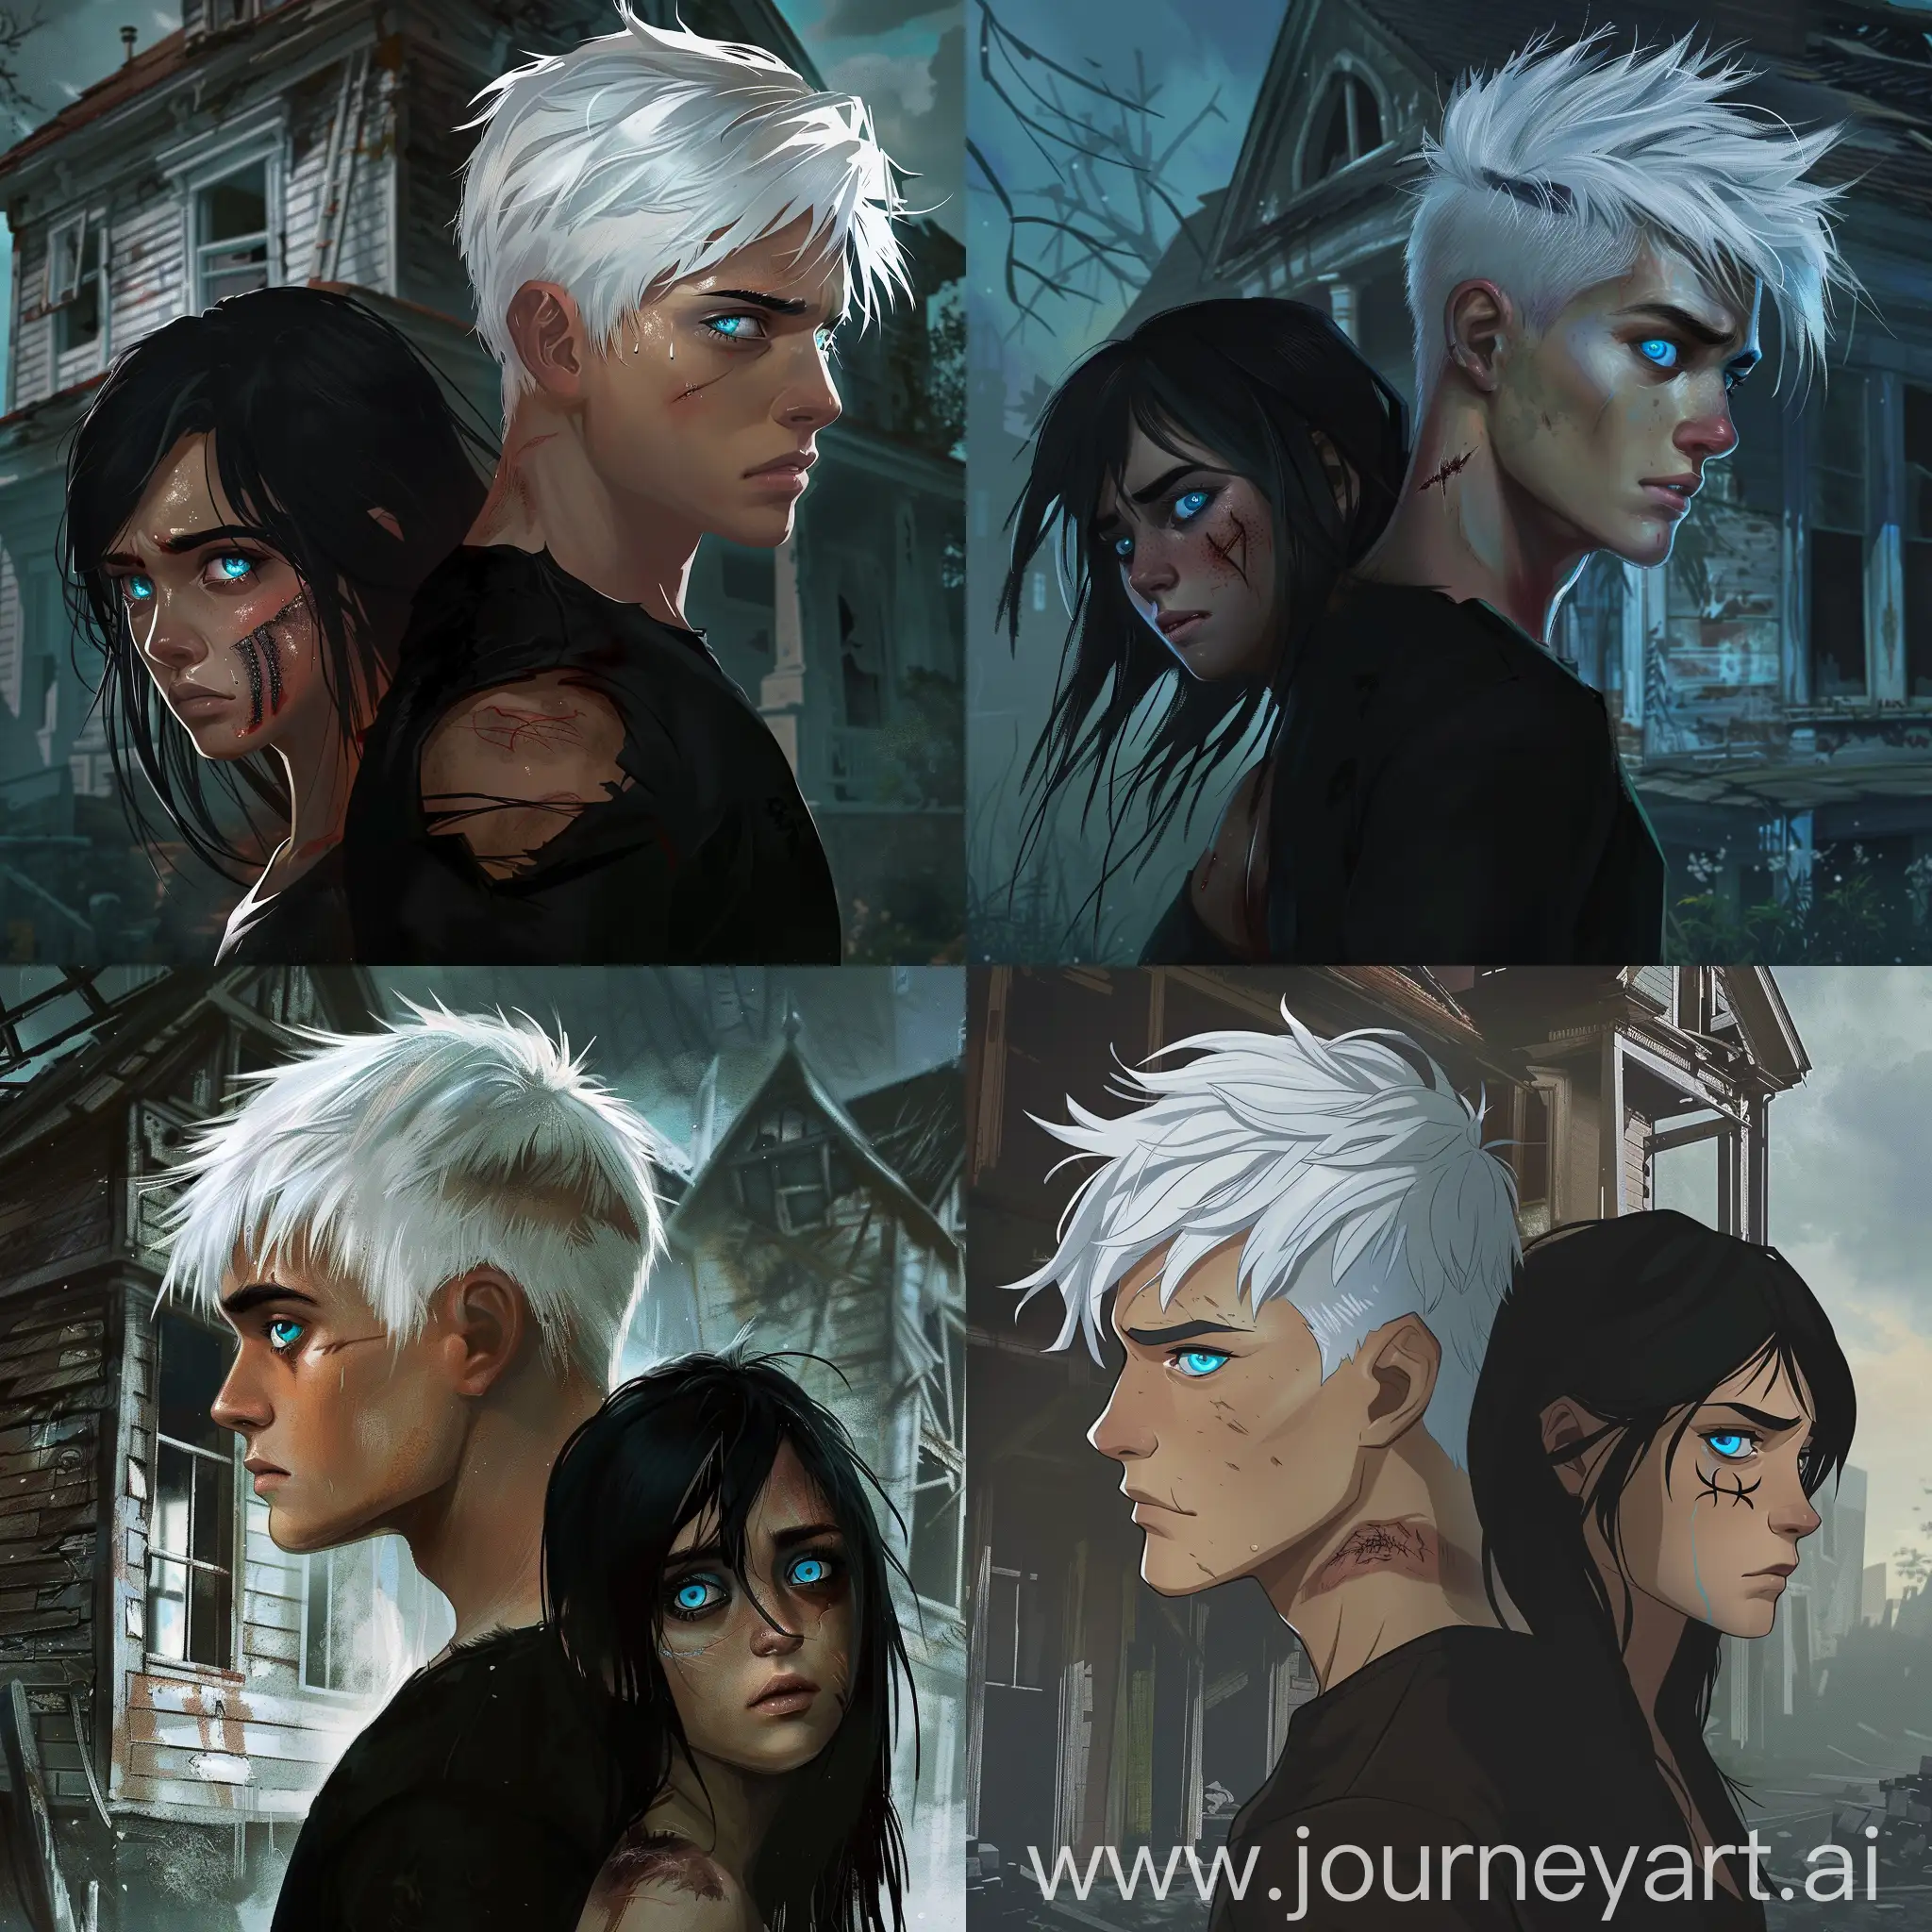 A tall young man with white hair and bright blue eyes, with a shaved nape. He stands against the background of an abandoned house with his back to a girl with black hair and a scar on her face. the girl is crying. she is much shorter than a man. The man is tall. hd, dramatic lighting, detailed